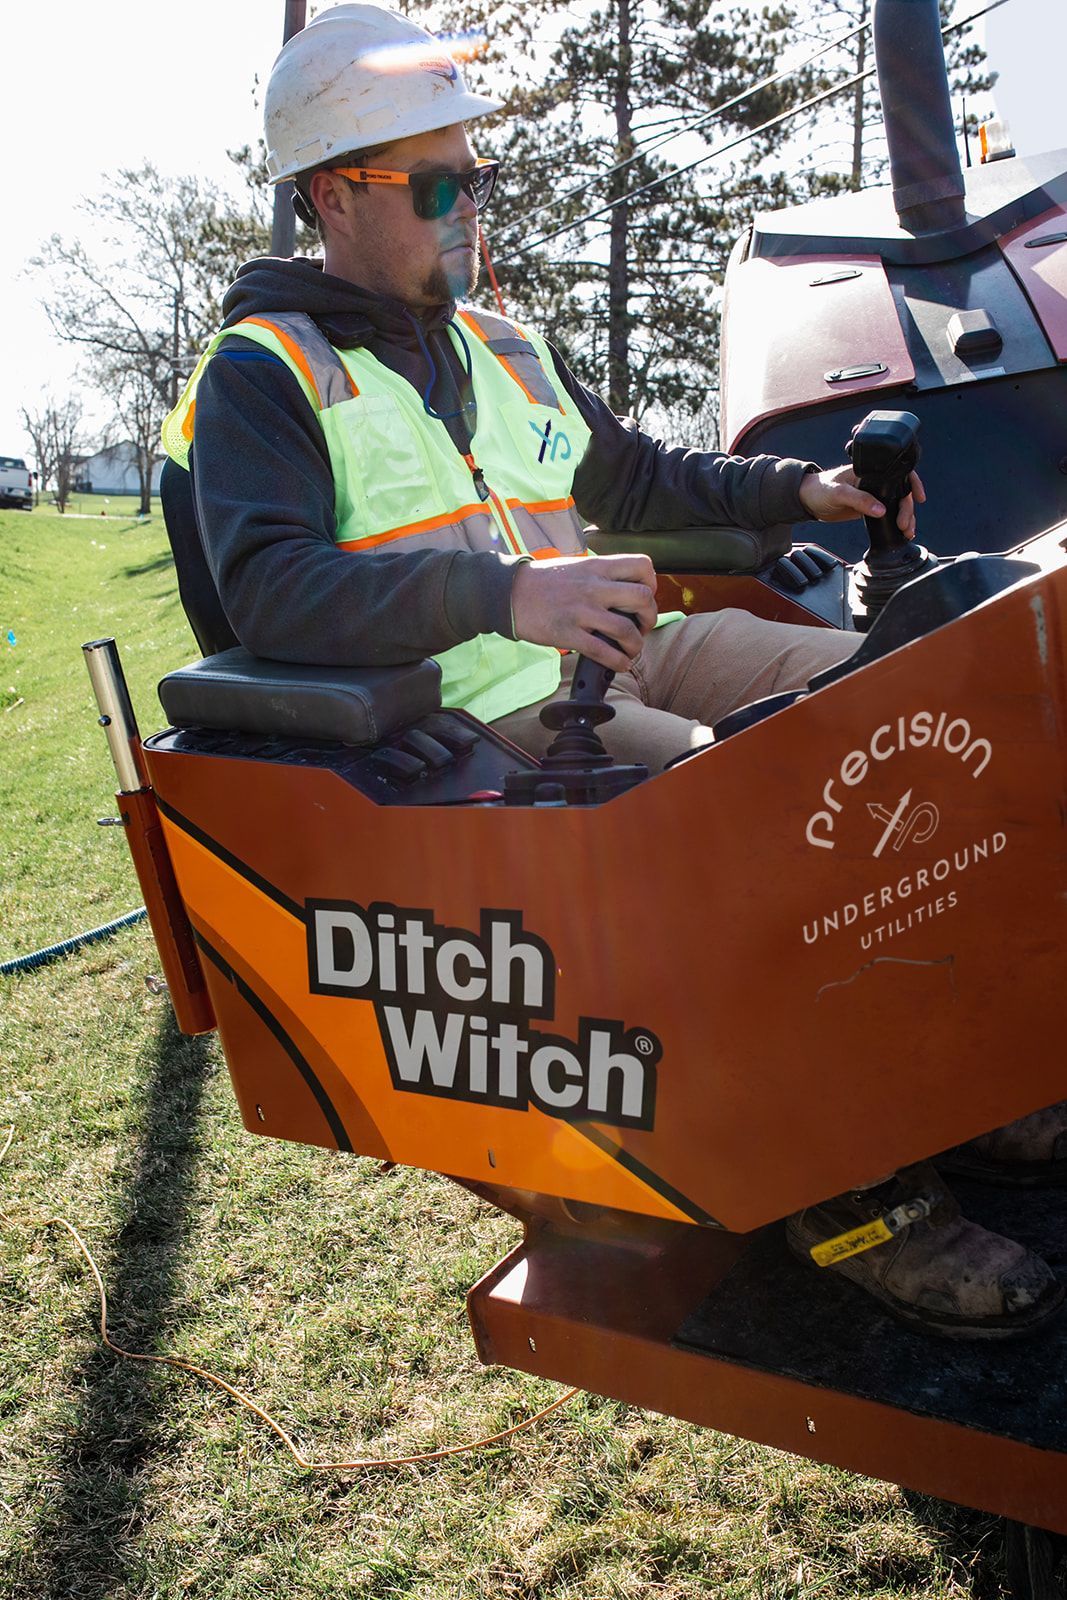 Utility workers using a ditch witch